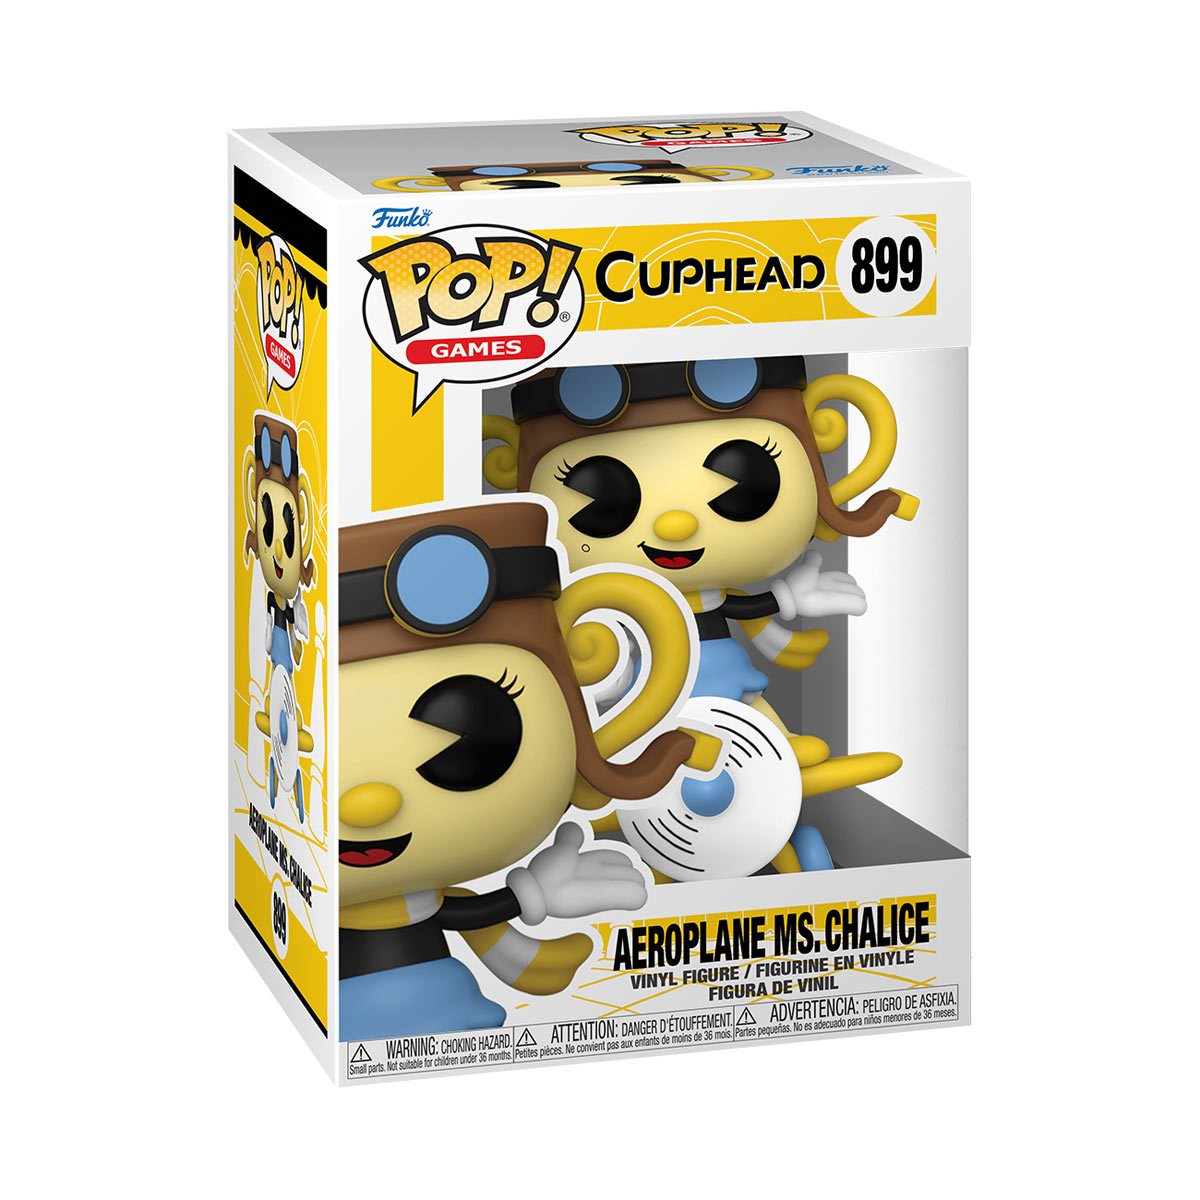 Funko Pop! One Piece: Monkey. D. Luffy #98 – Chalice Collectibles